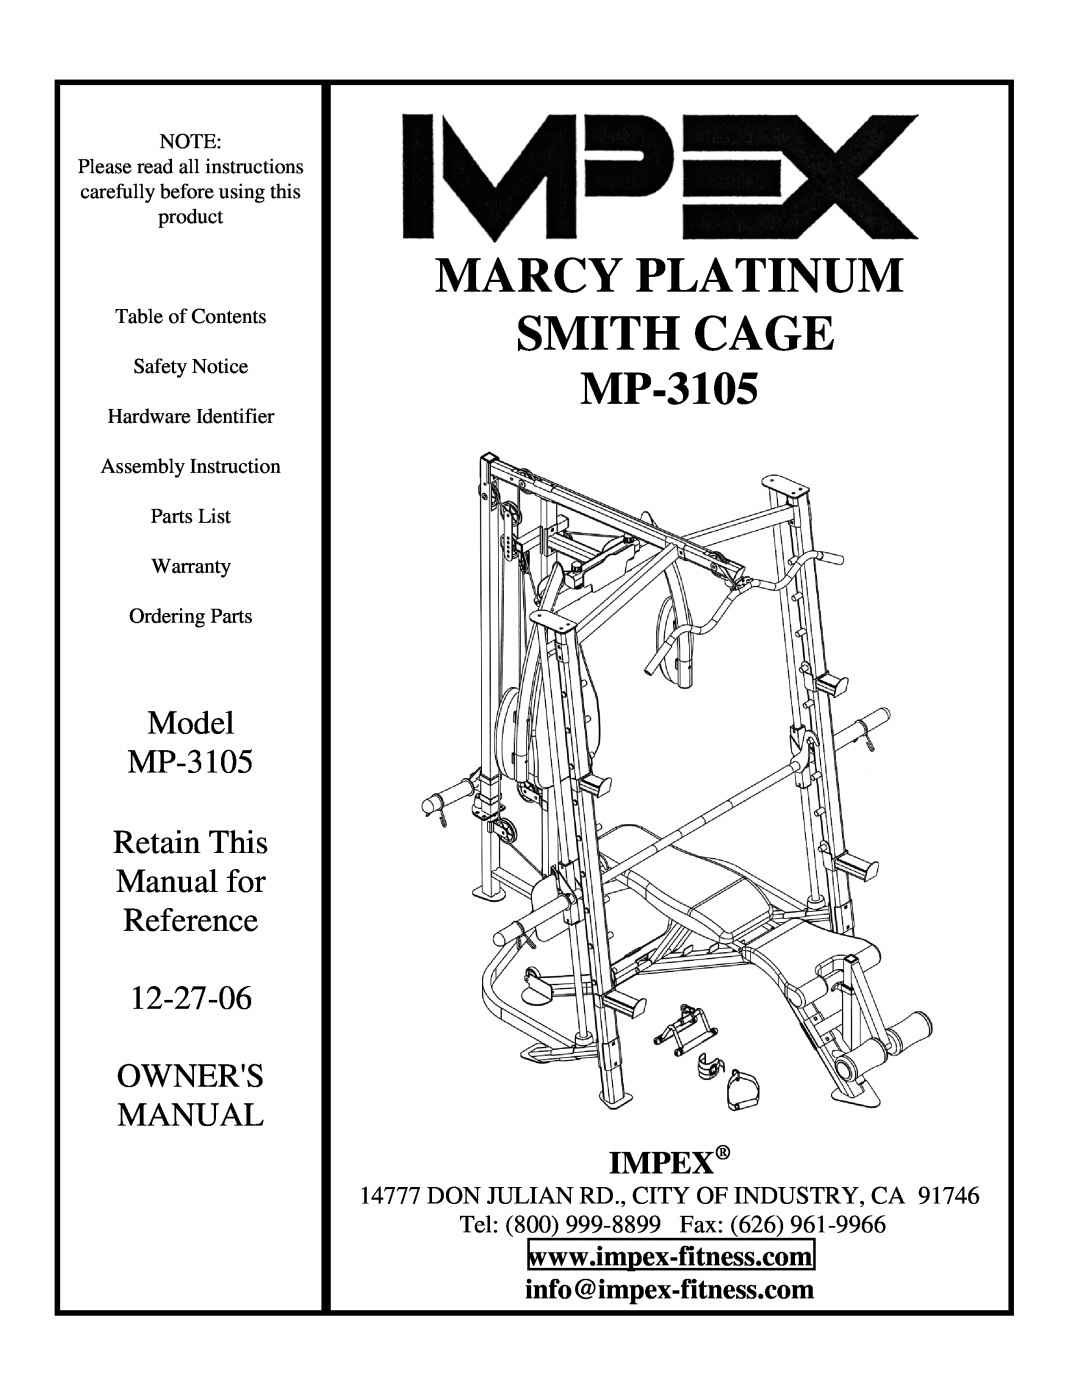 Impex MP-3105 manual Impex, info@impex-fitness.com, Smith Cage, Marcy Platinum, Model, Retain This, Manual for, Reference 